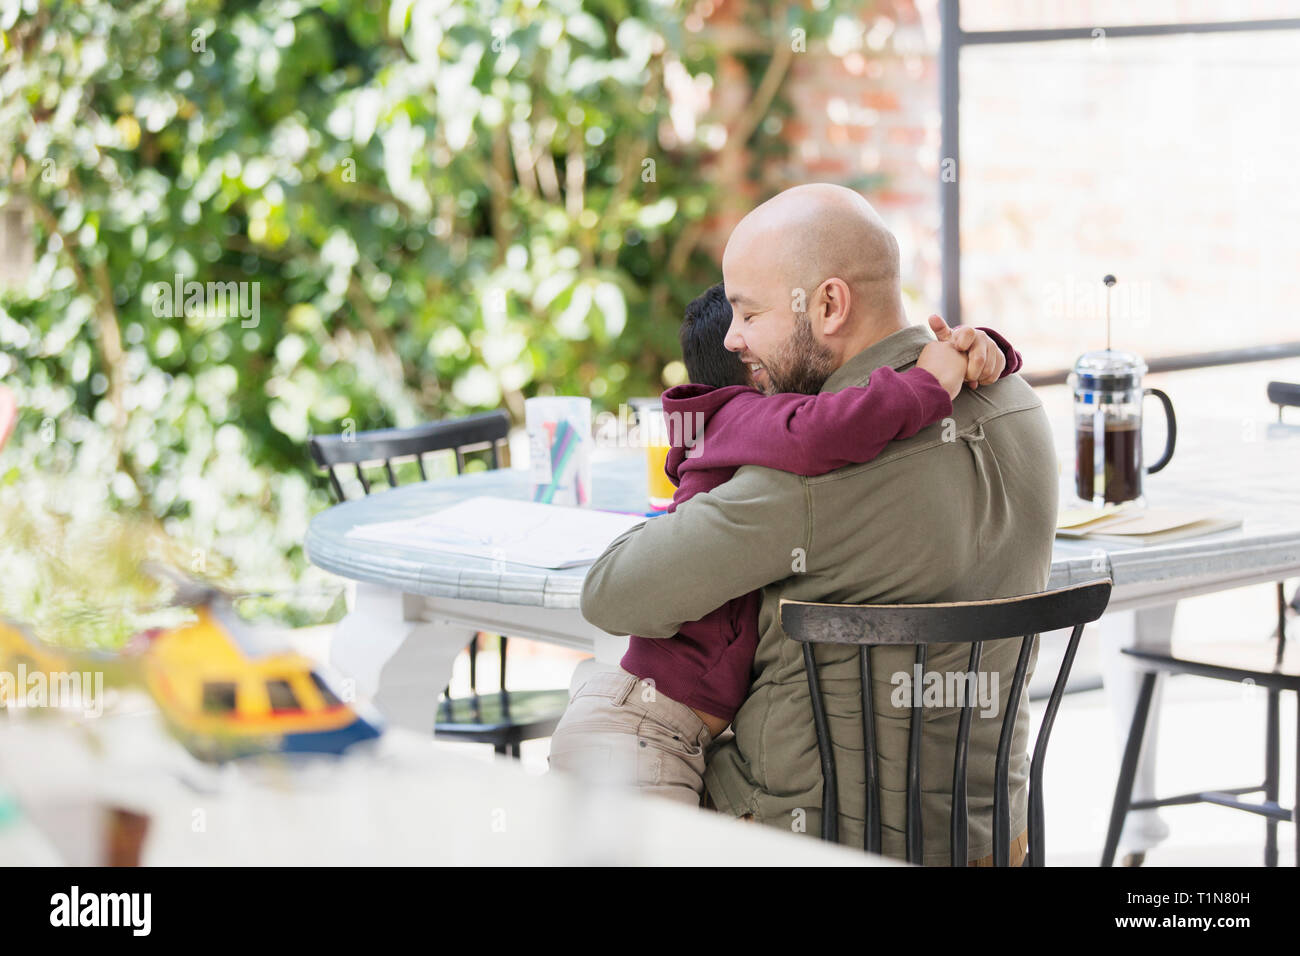 Affectionate father and son hugging at table Stock Photo